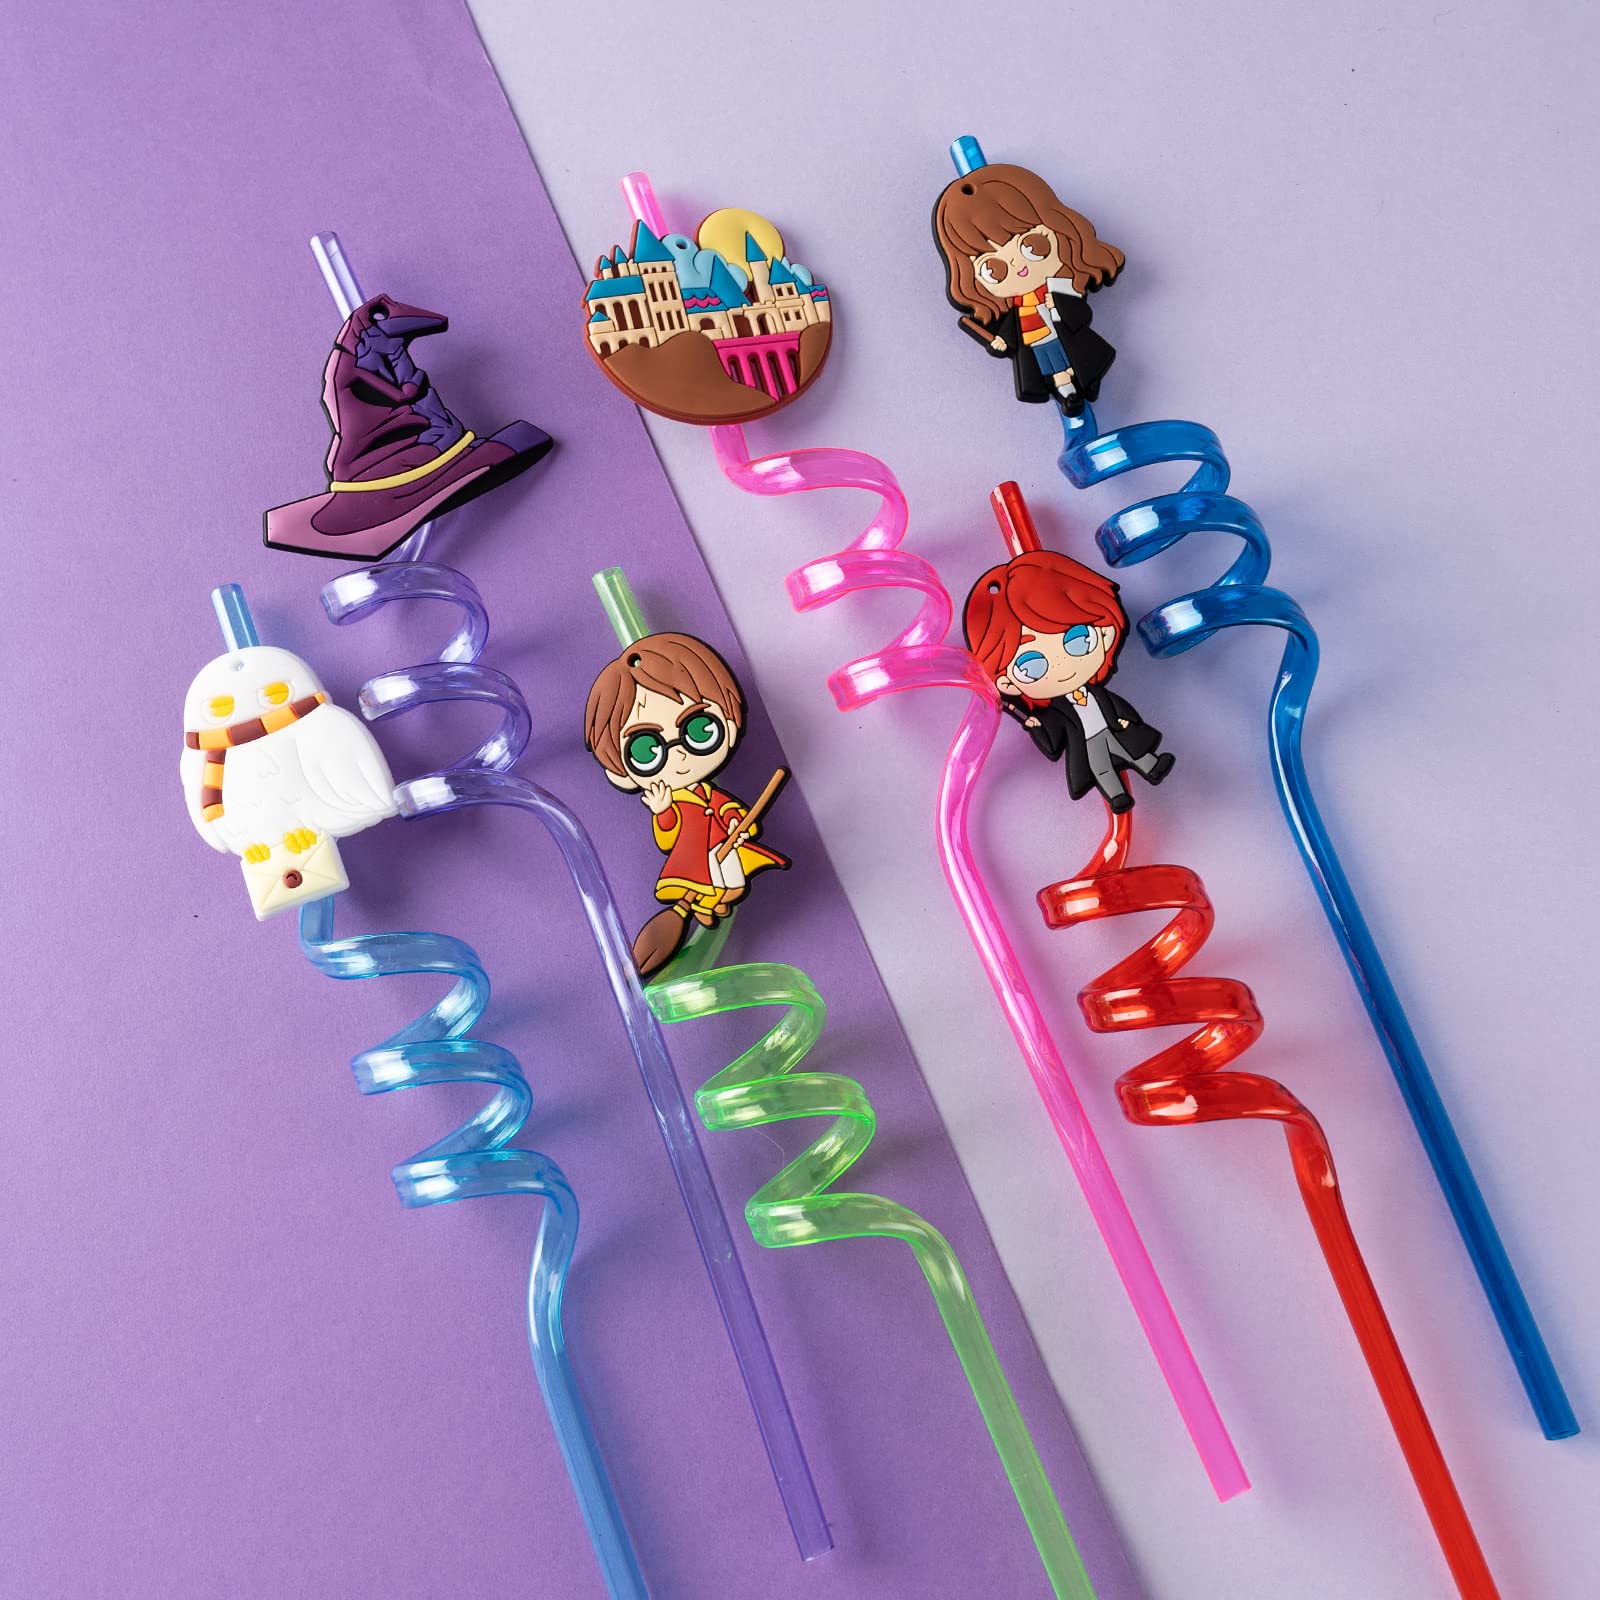 24Pcs Birthday Party Supplies Reusable Drinking Straws,8 Designs Magic Wizard Themed Party Favors with 2 Cleaning Brush